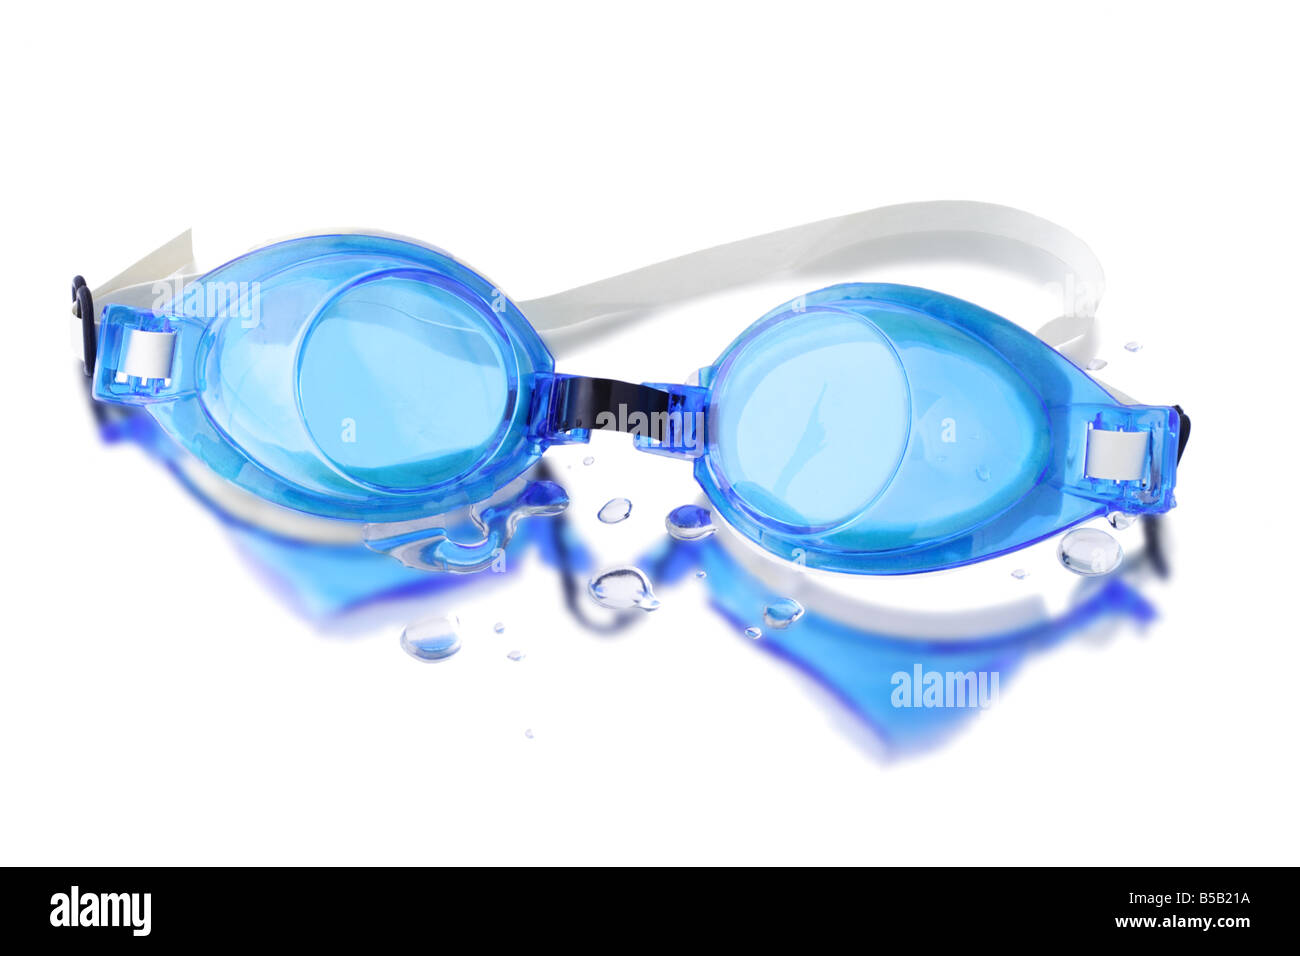 Wet swimming goggles with reflection on white background Stock Photo